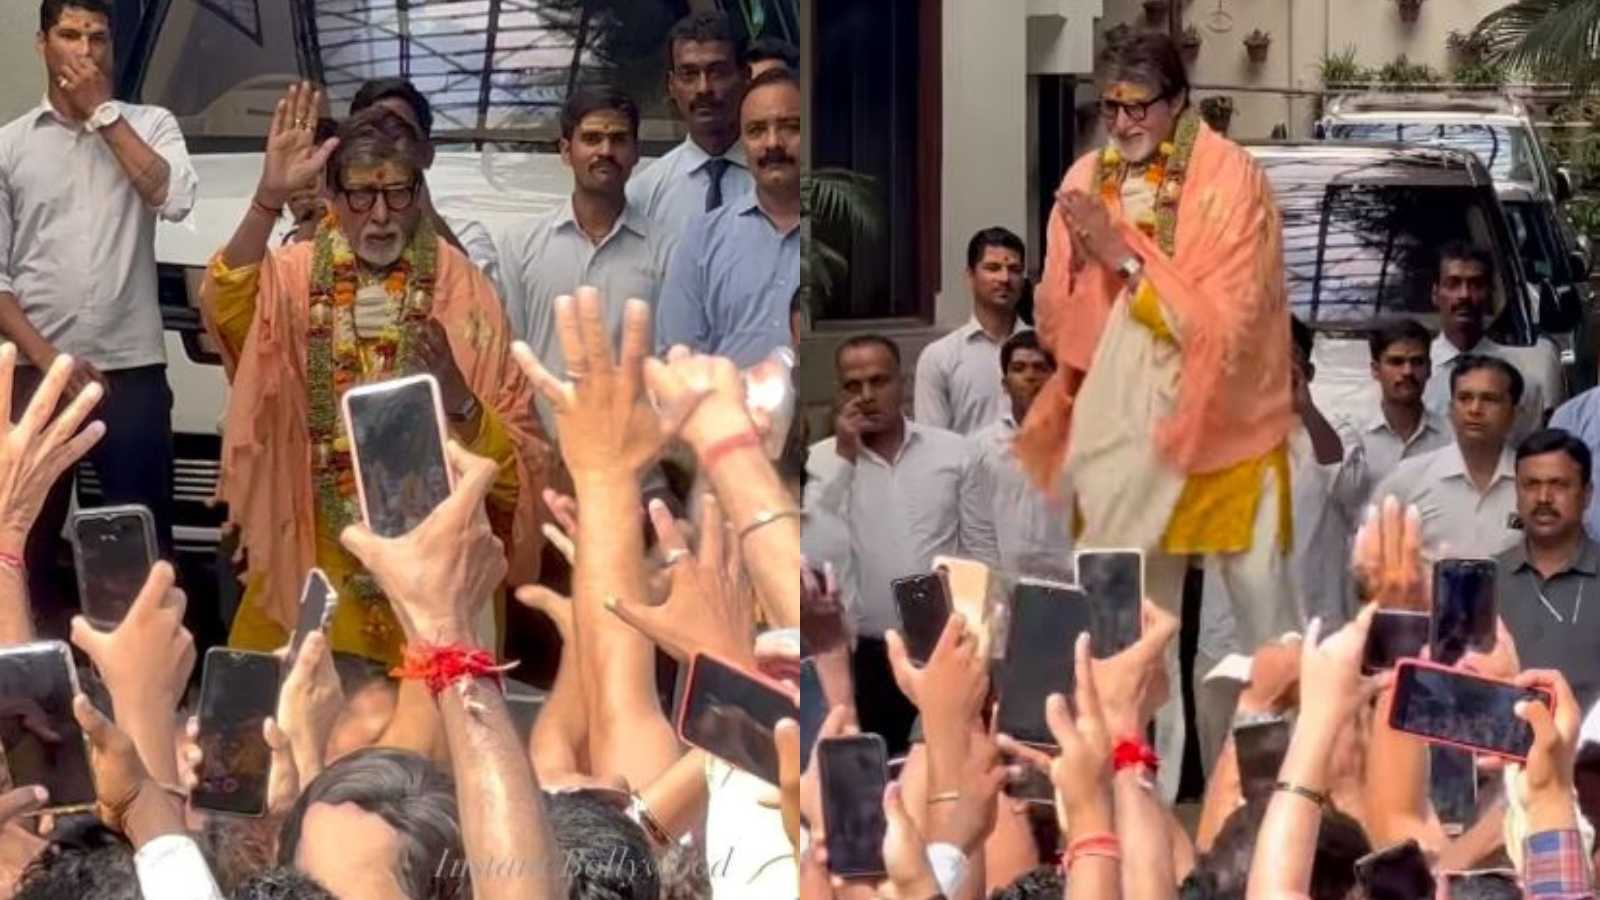 Amitabh Bachchan steps out to celebrate his birthday with fans, receives heartwarming welcome; watch